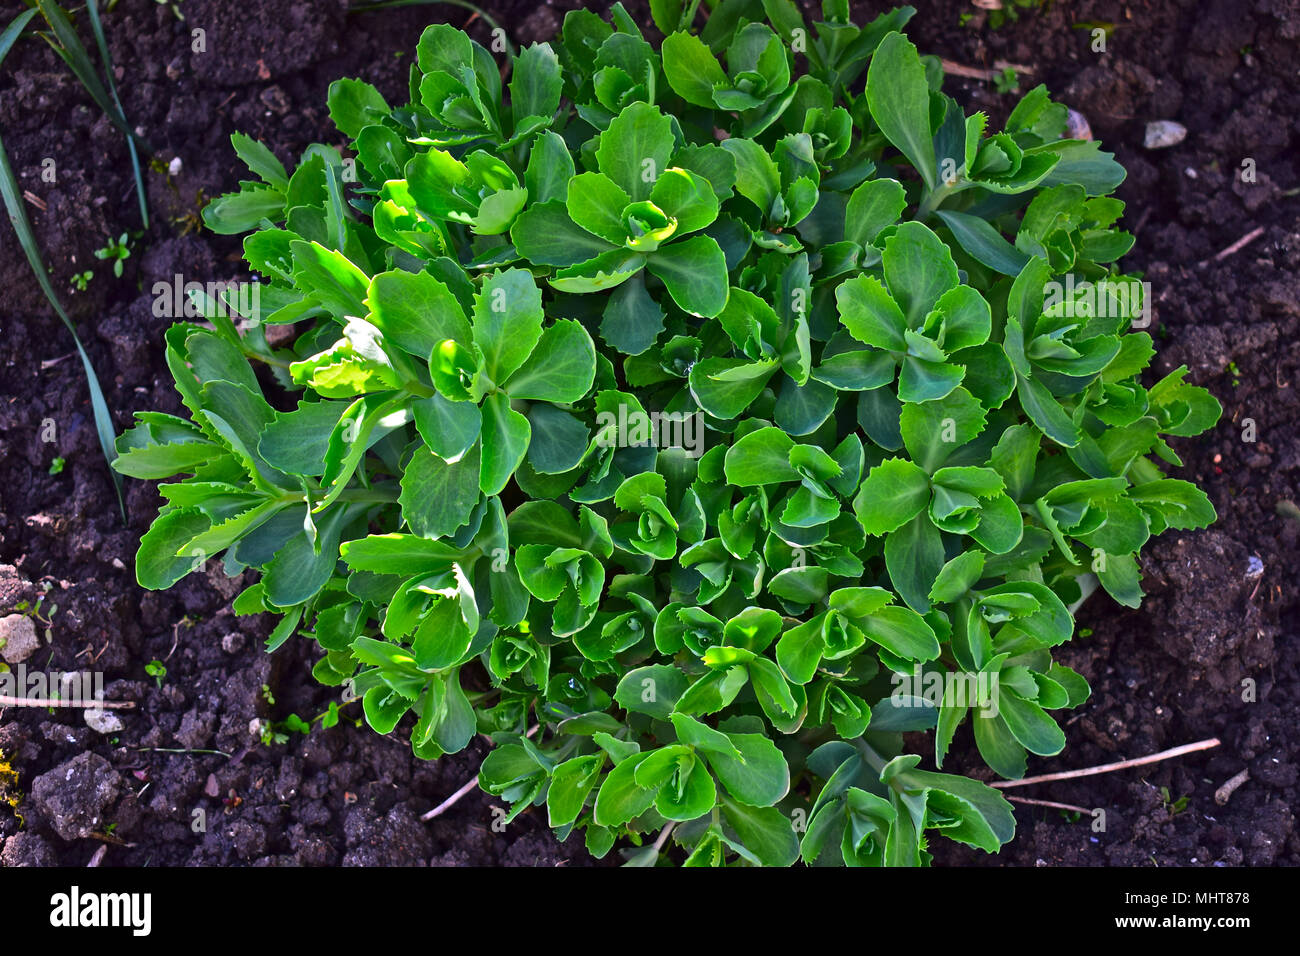 The lush green leaves of the plant emerging in Springtime in a damp heavy clay soil border. Stock Photo